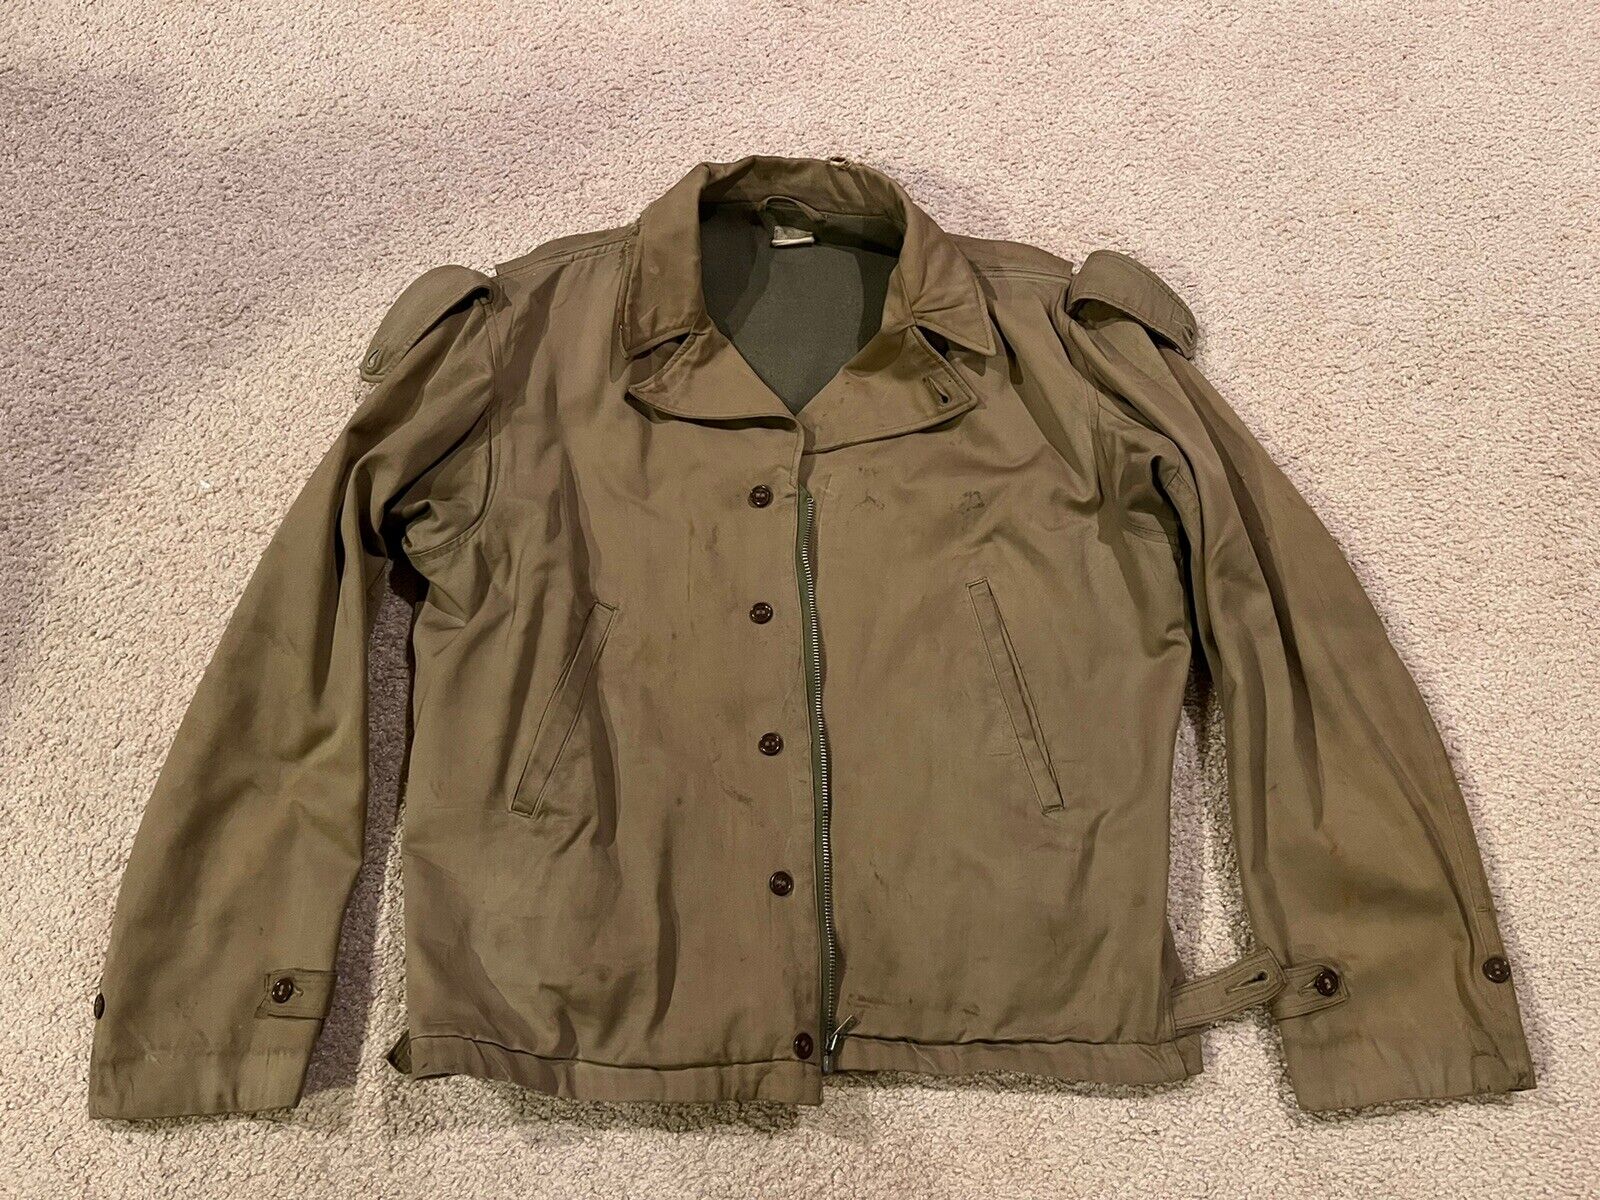 VTG Men's 1941 WWII US Military Field Long Sleeve Jacket - Size S/M?